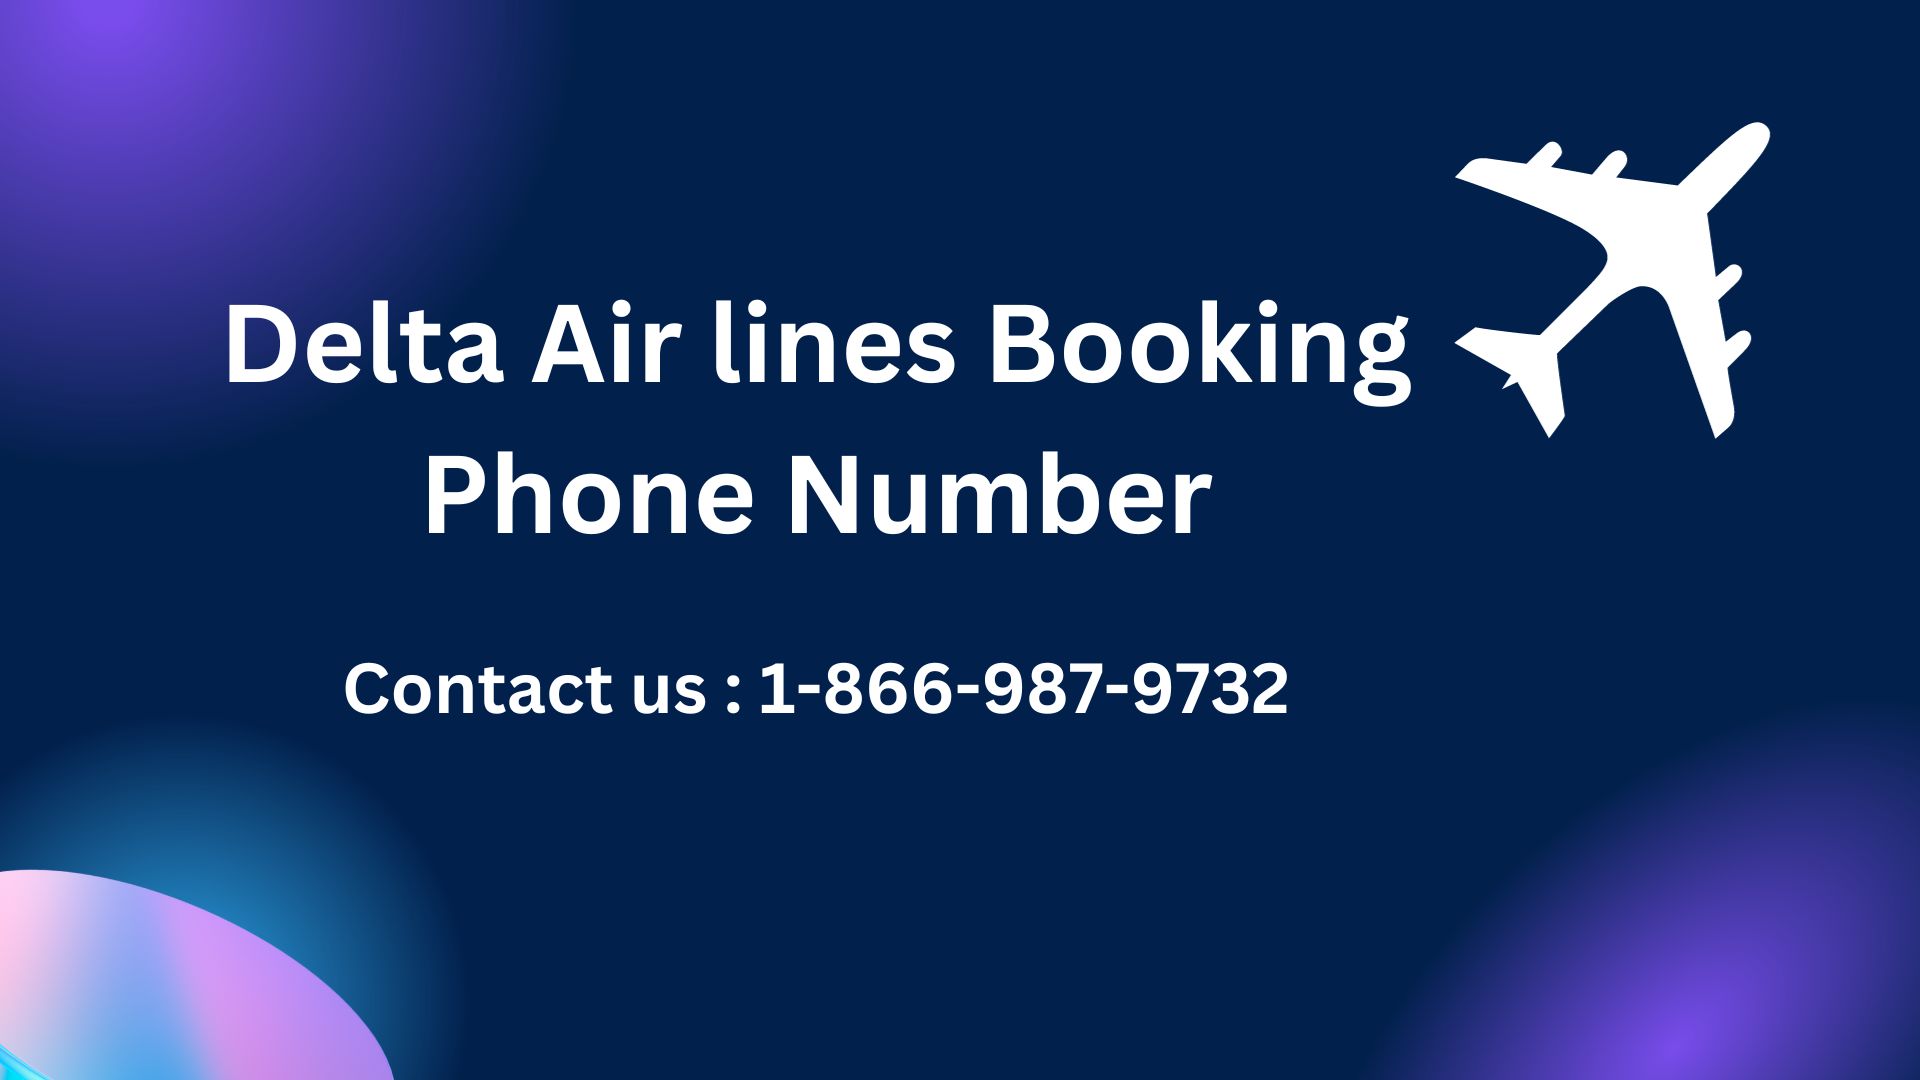 Delta Air lines Booking Phone Number